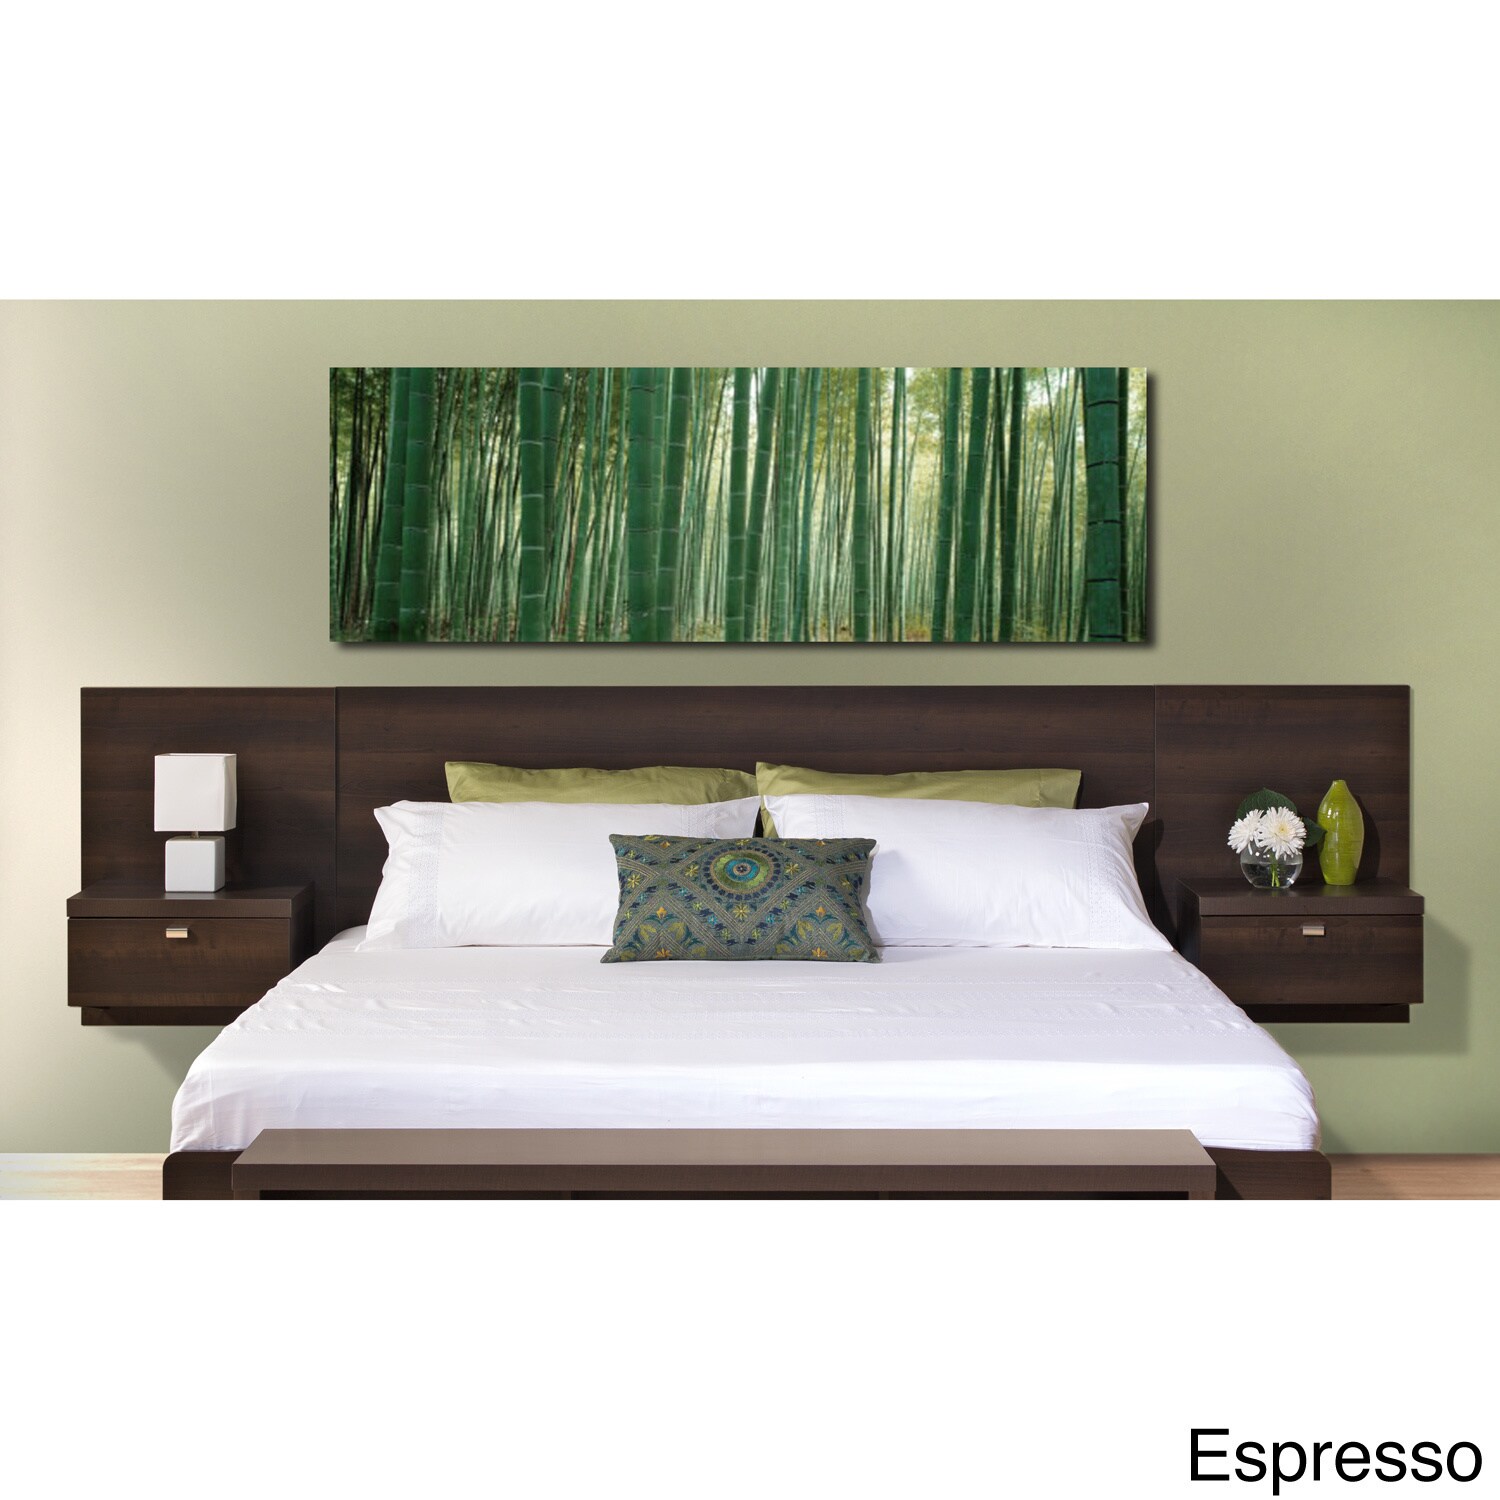 Valhalla Designer Series Floating King Headboard with Integrated Nightstands